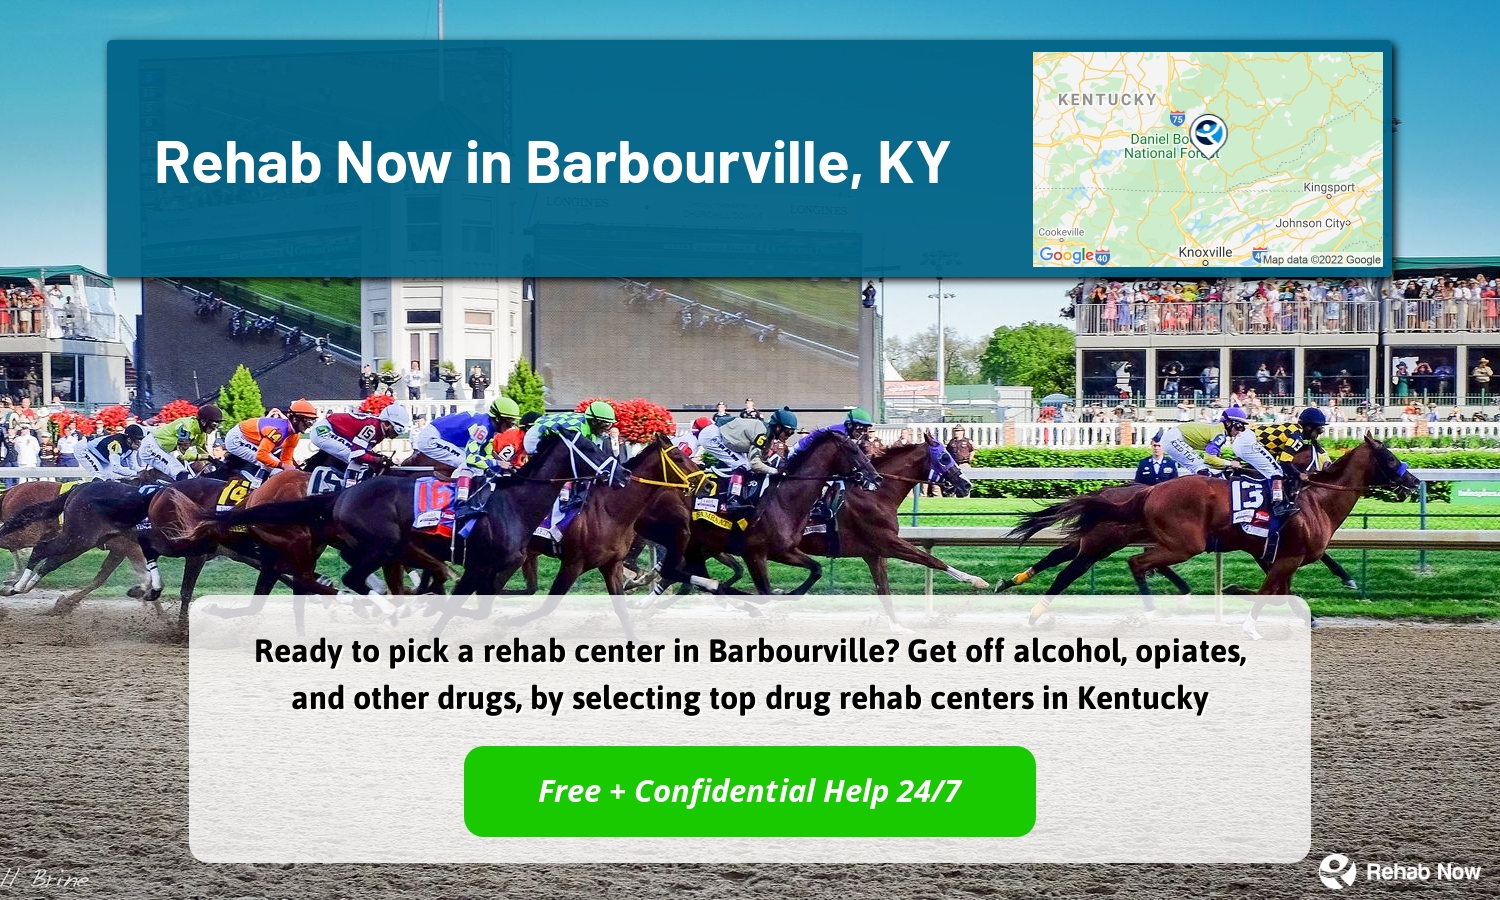 Ready to pick a rehab center in Barbourville? Get off alcohol, opiates, and other drugs, by selecting top drug rehab centers in Kentucky